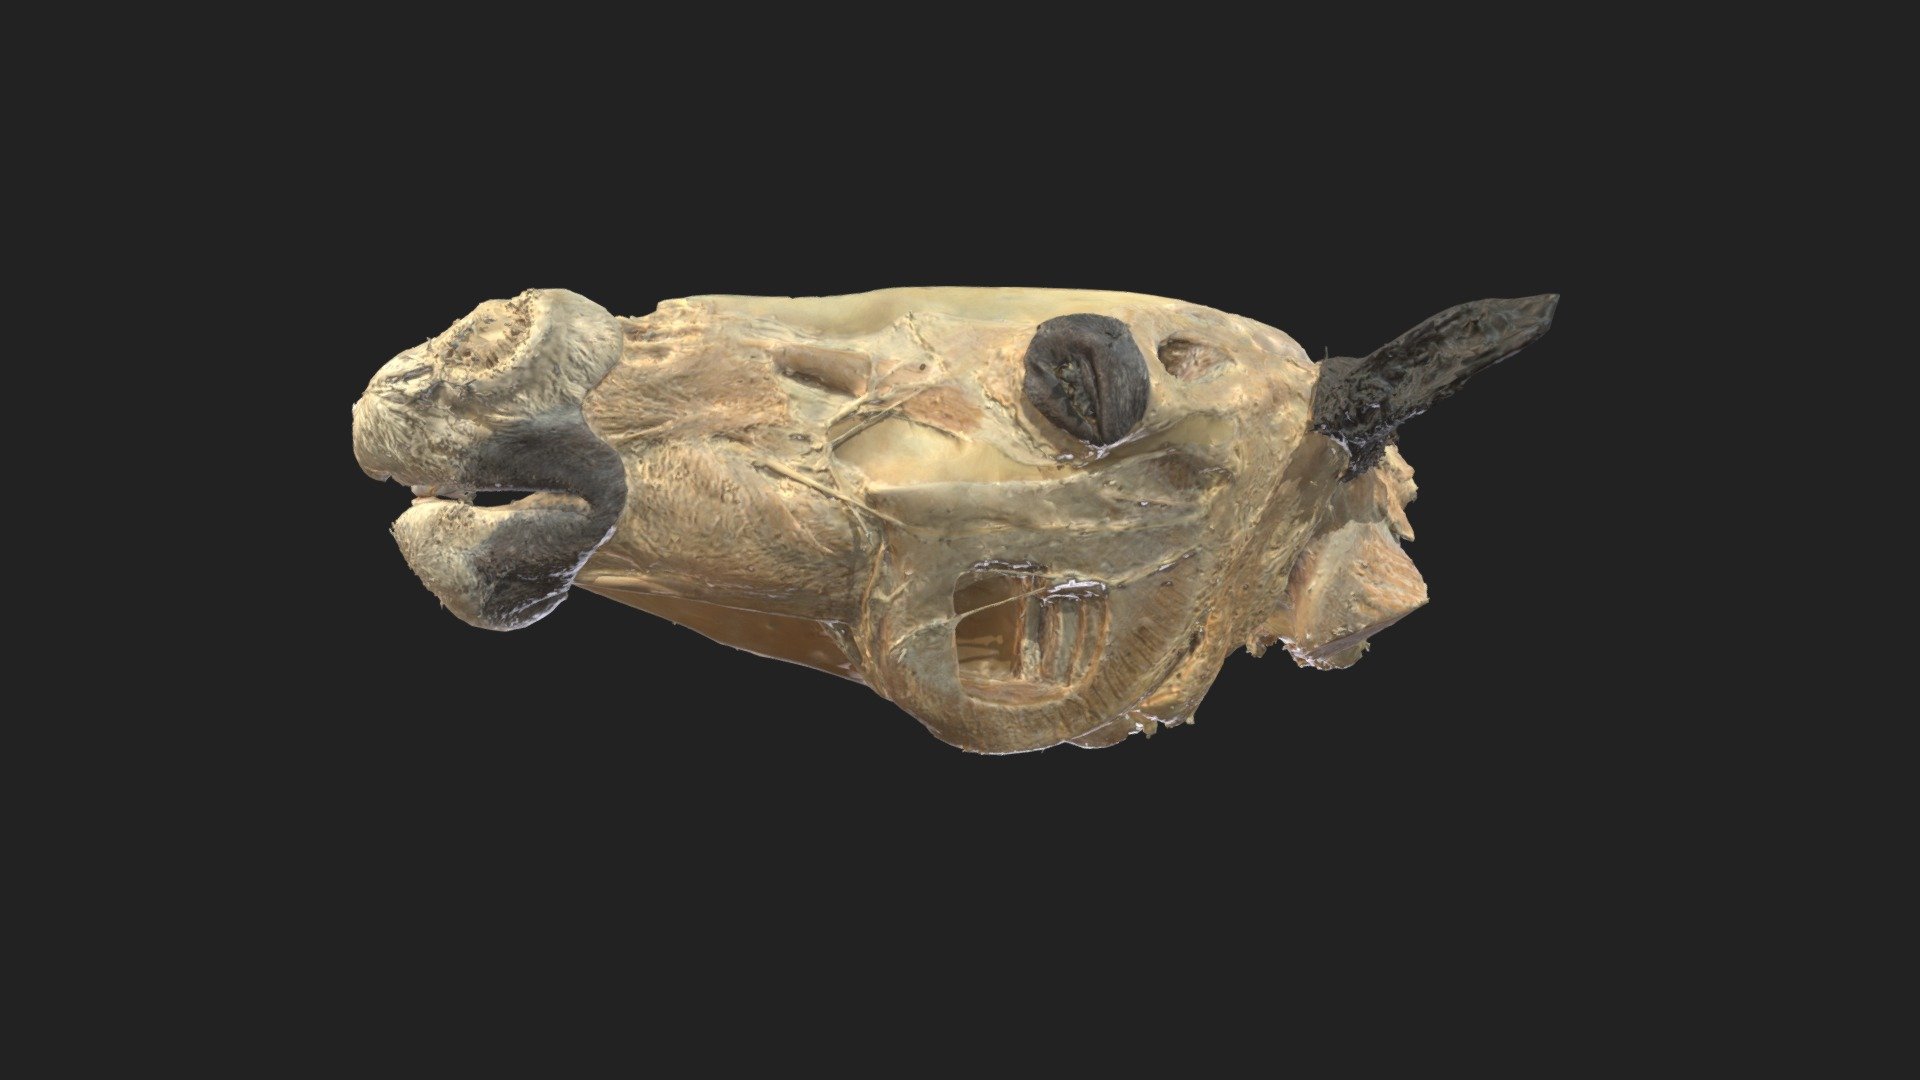 halved head of a horse 

size of specimen: 643.8 x 281.4 x 84.5 mm

3D scanning performed with the structured light scanners “Artec Leo” and “Artec Space Spider” - halved head horse - 3D model by vetanatMunich 3d model